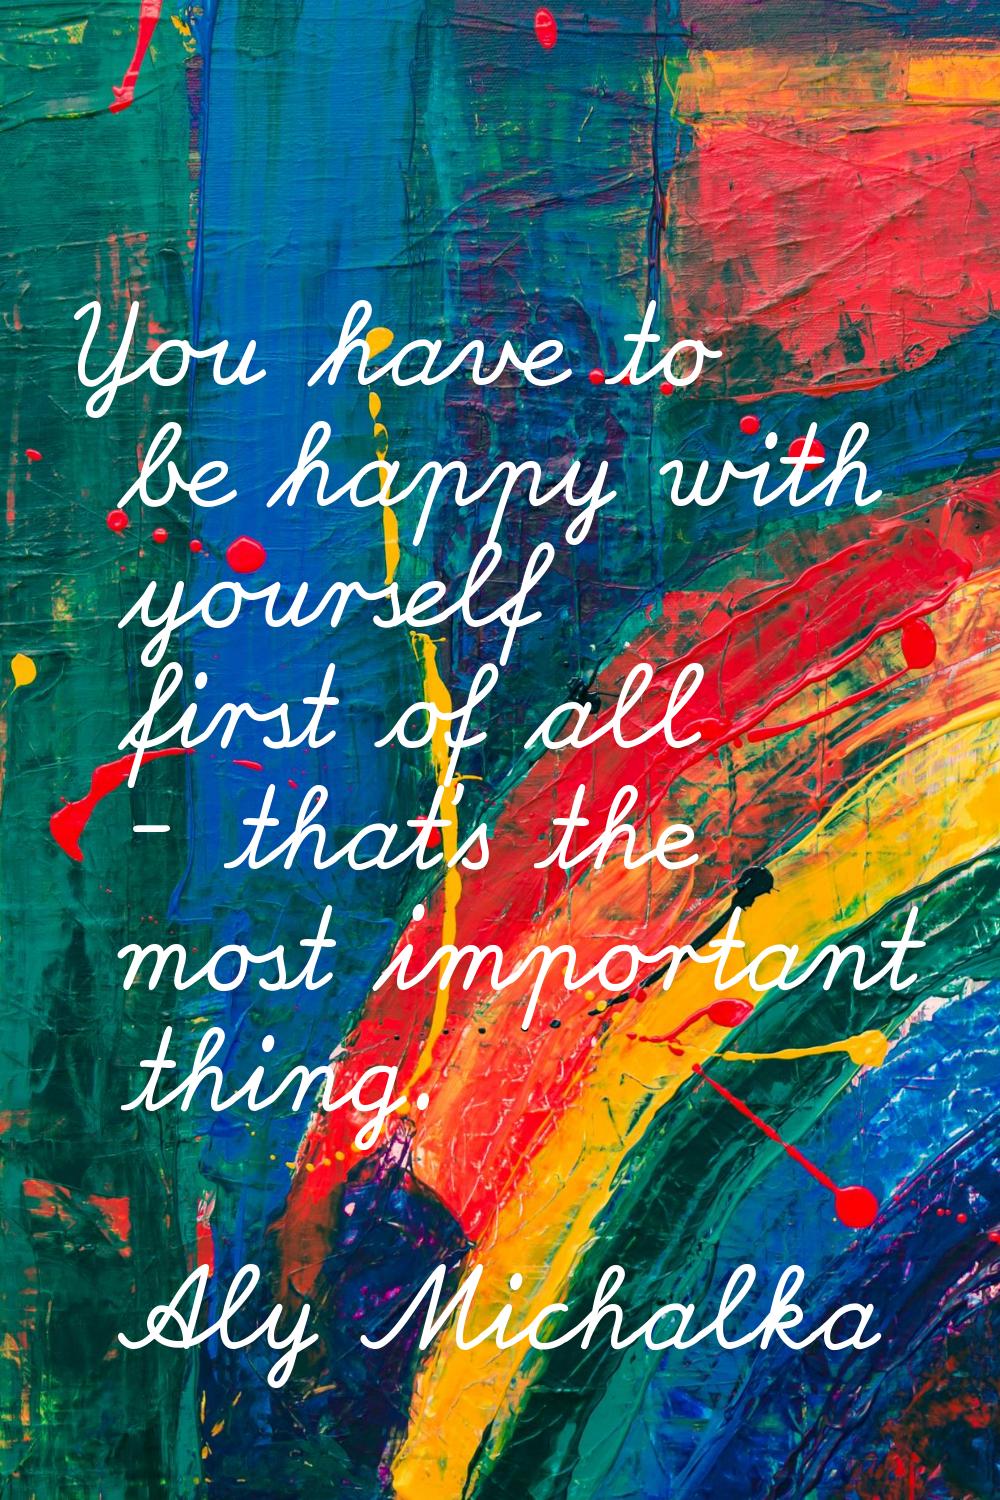 You have to be happy with yourself first of all - that's the most important thing.